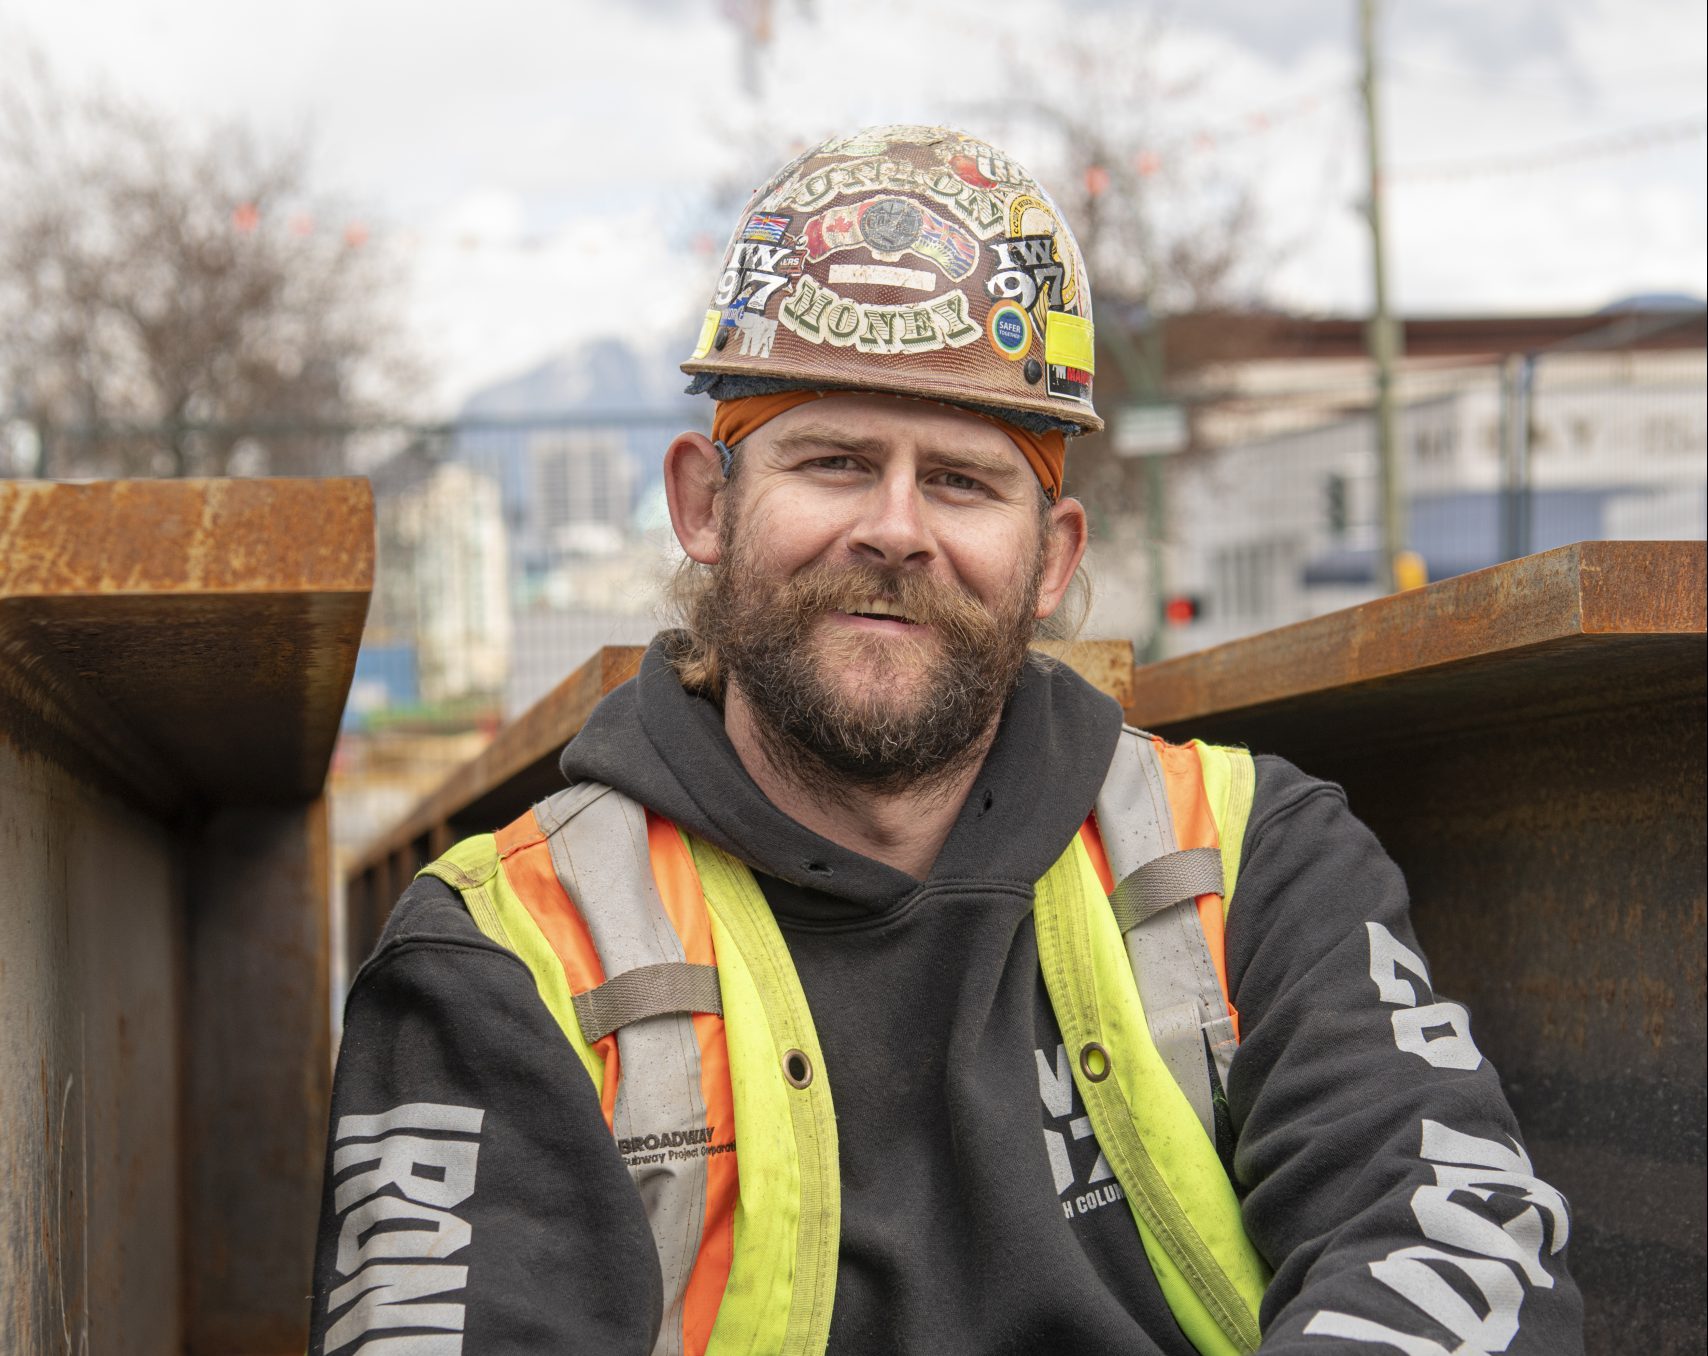 An image of an Apprentice ironworker named Kyle smiling